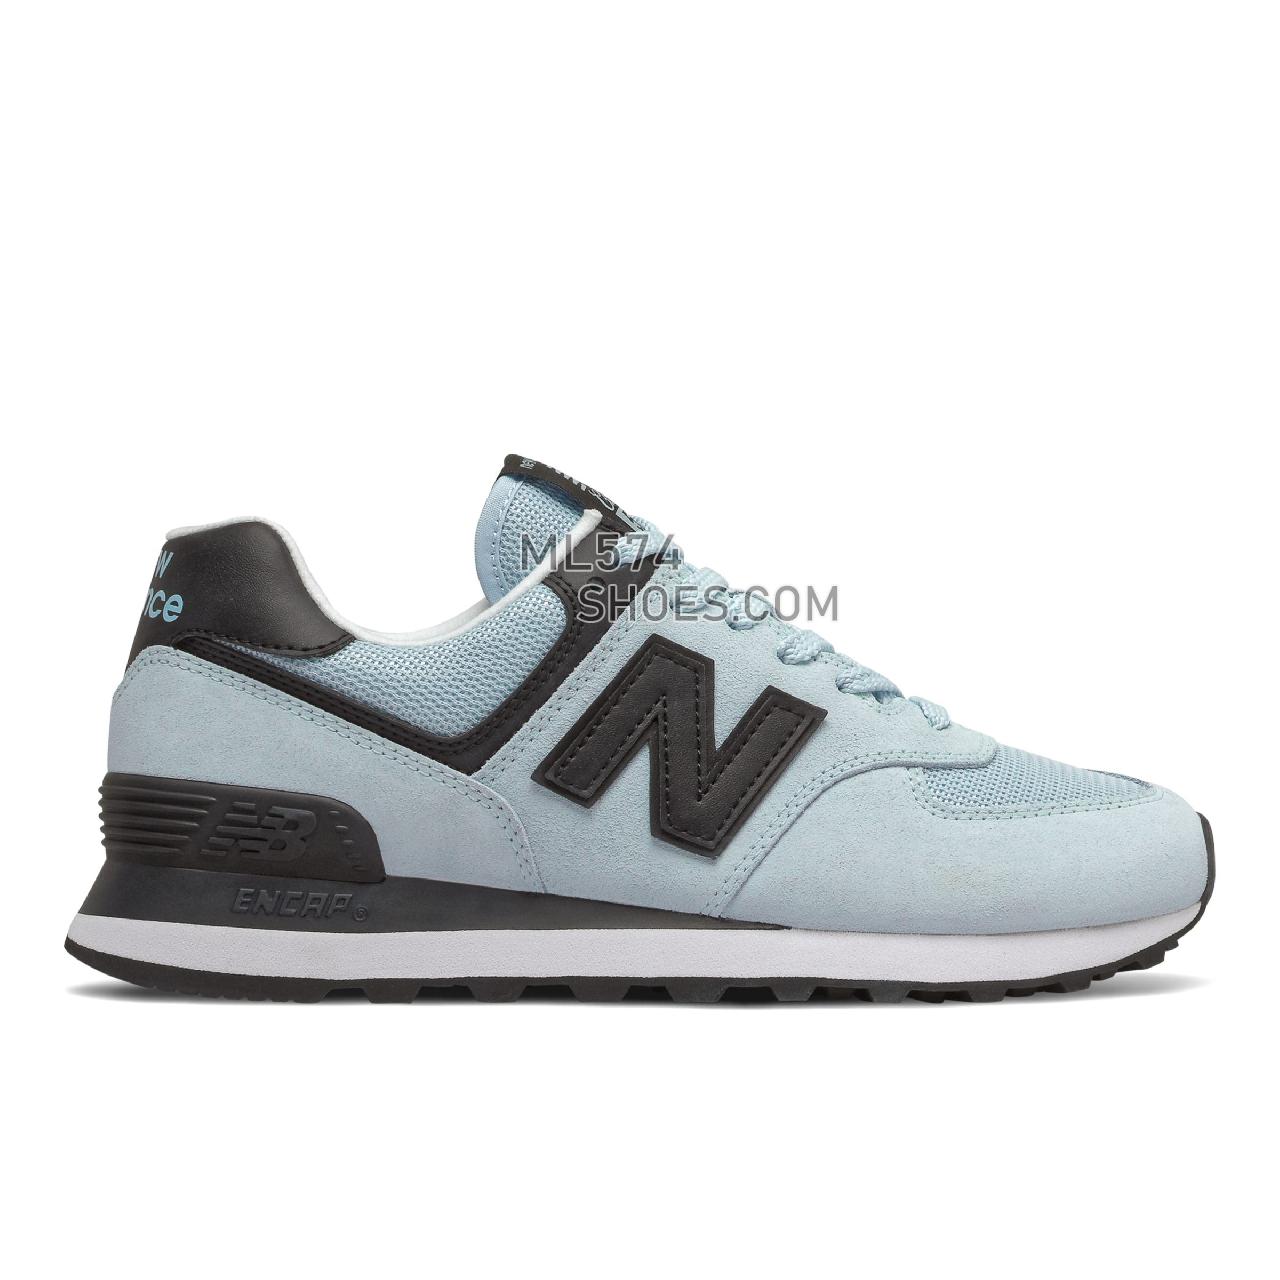 New Balance 574 - Women's Classic Sneakers - Morning Tide with Black - WL574MA2